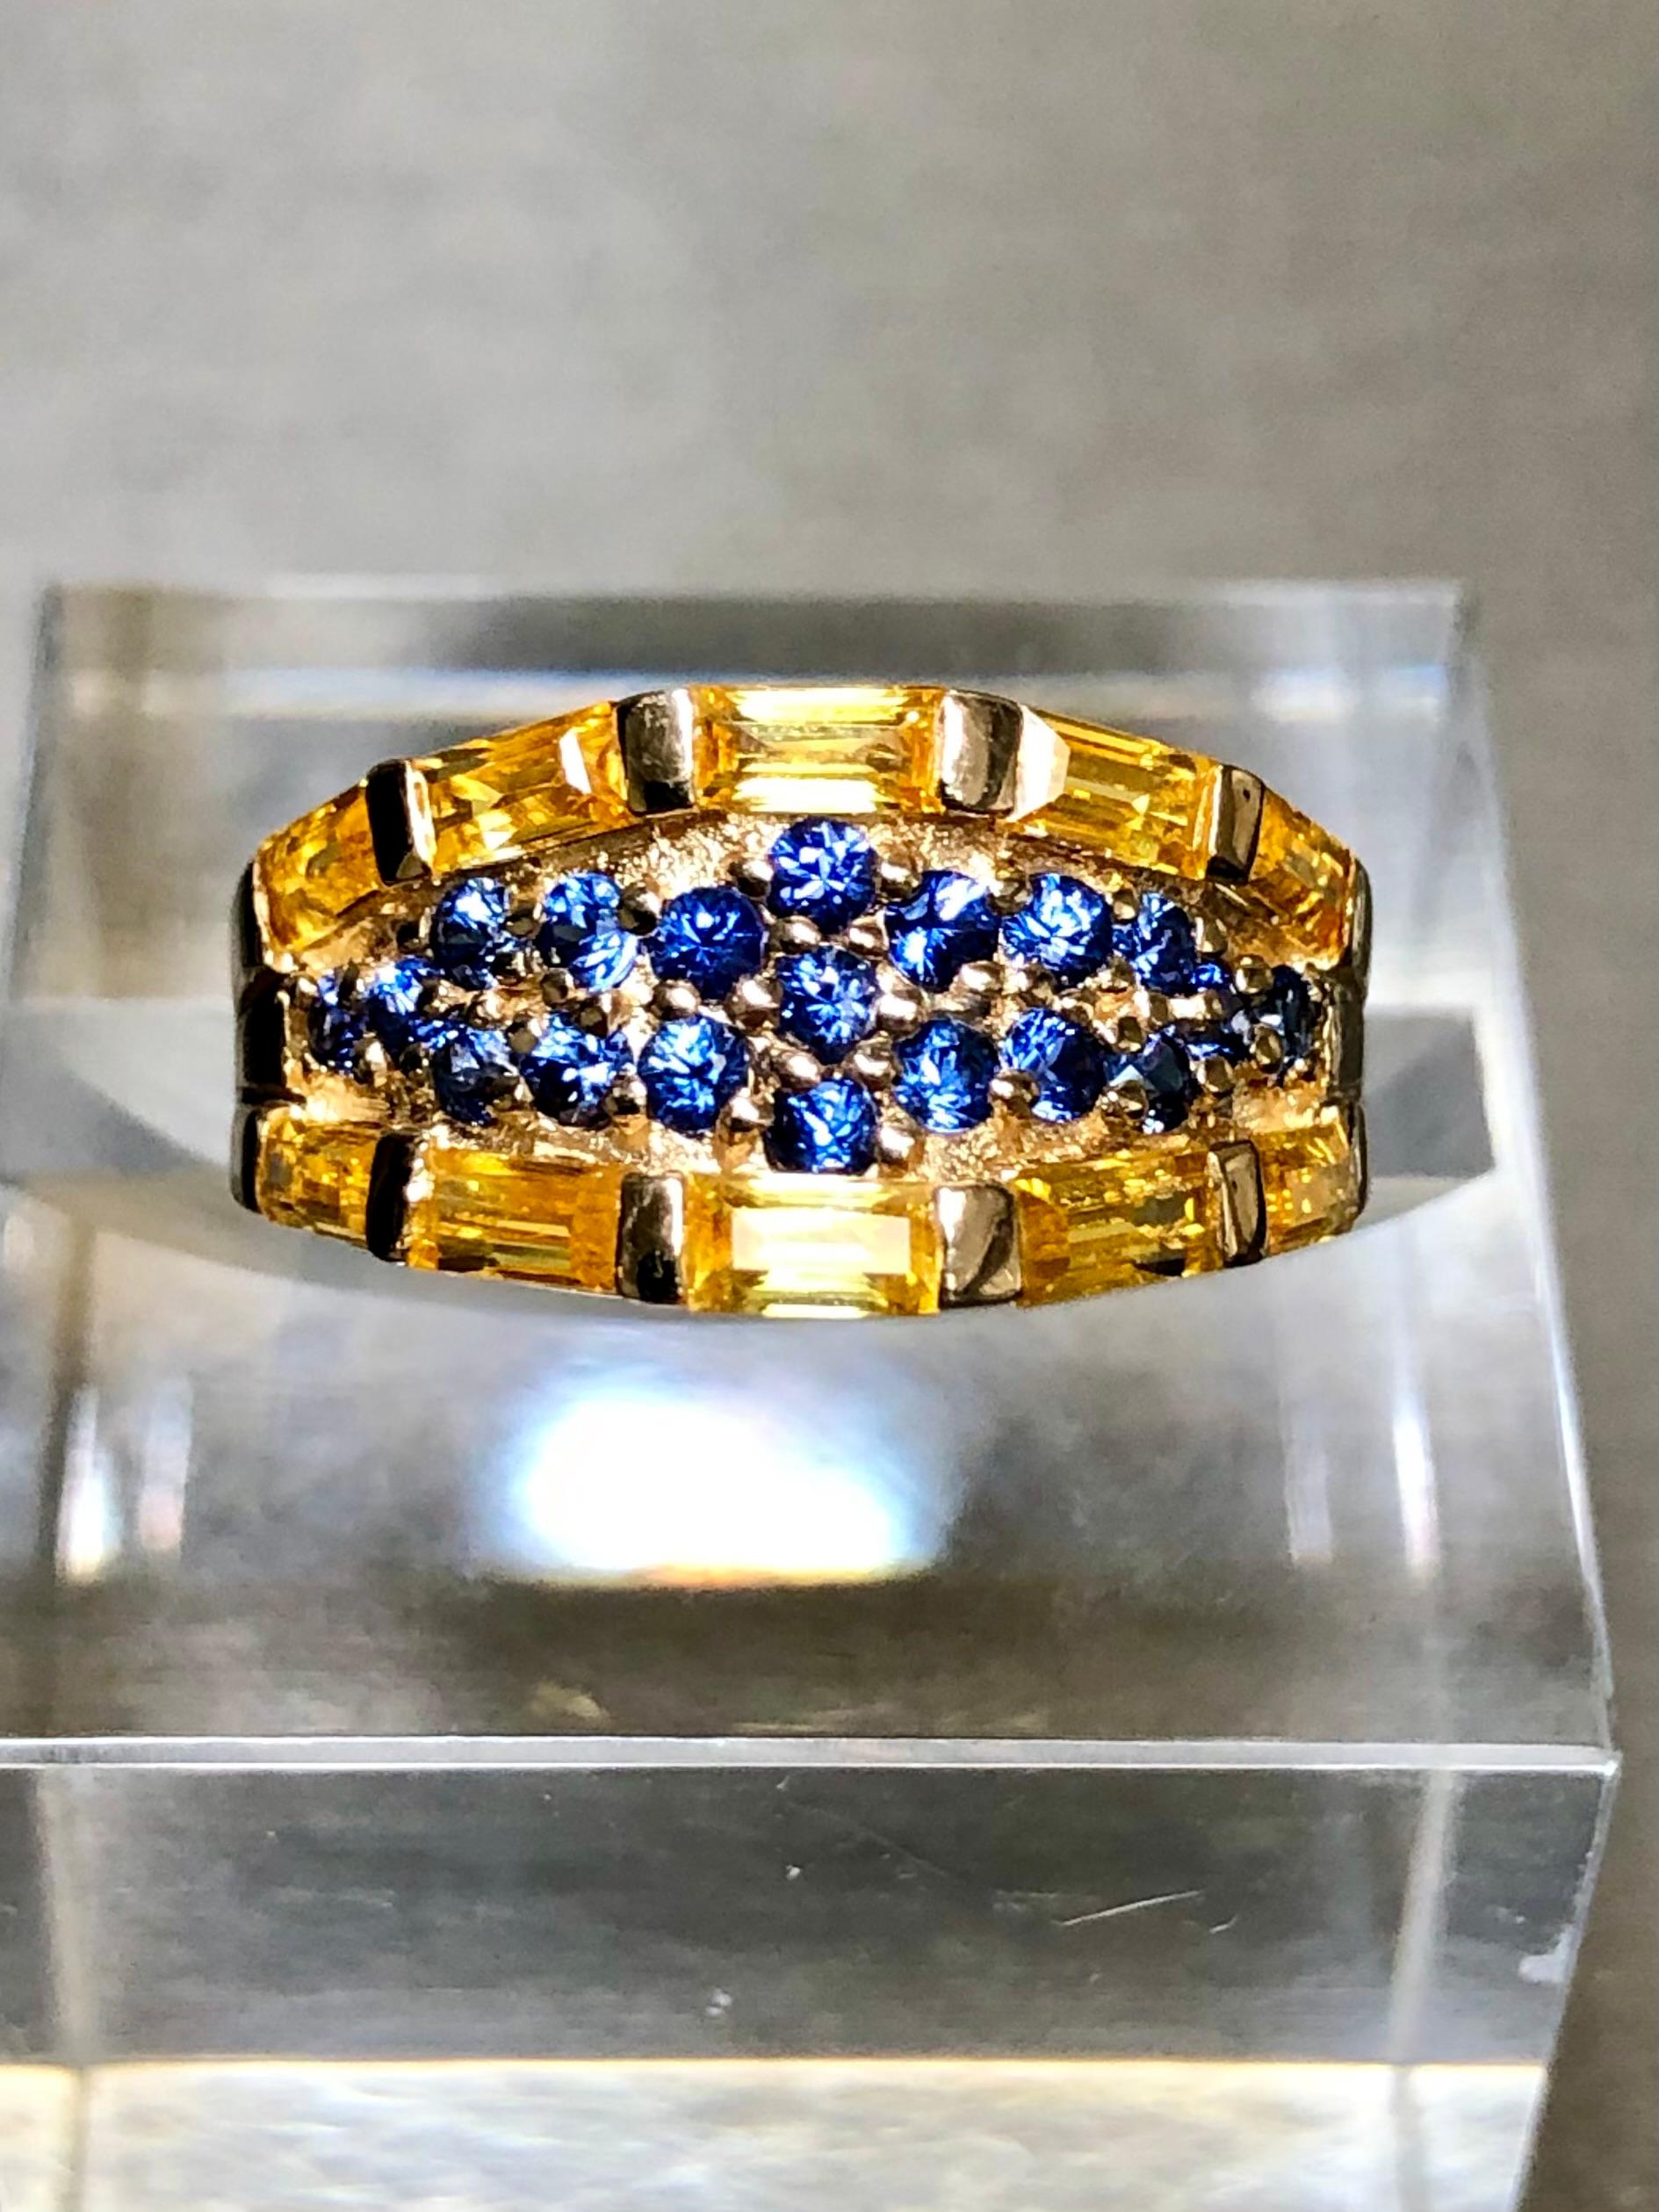 
A bright and vivid right-hand ring done in 14K yellow gold both tension and bead set with natural (heat only) yellow baguette sapphires (1.50cttw) and blue round sapphires (.95cttw). A stunning addition to anyone’s